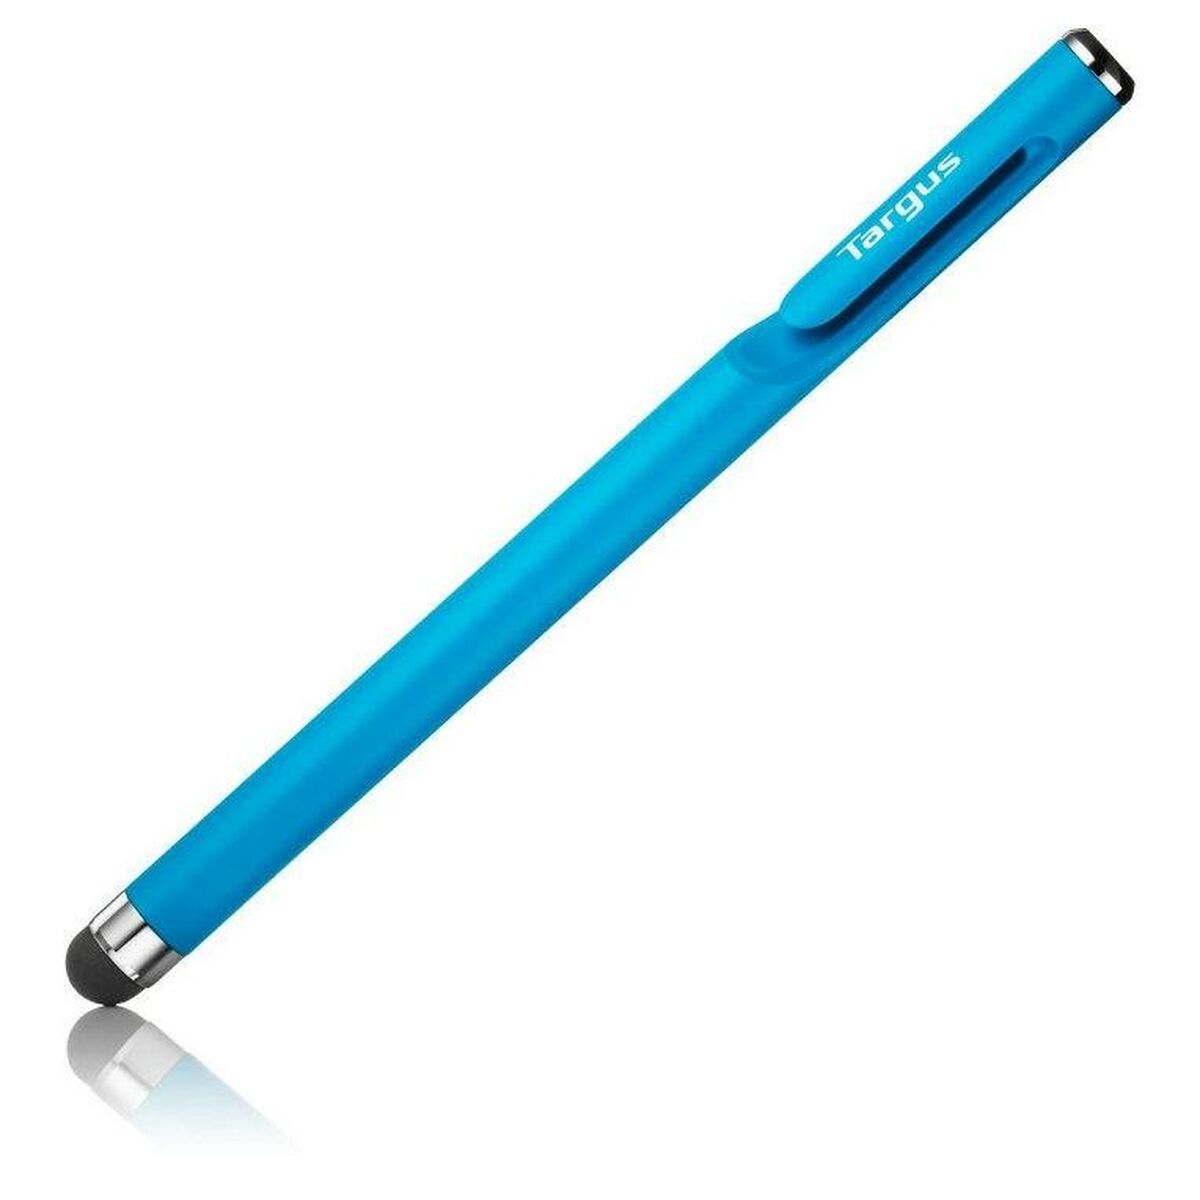 Pencil Targus AMM16502AMGL Tablet, Targus, Computing, Accessories, pencil-targus-amm16502amgl-tablet, Brand_Targus, category-reference-2609, category-reference-2803, category-reference-2812, category-reference-t-19685, category-reference-t-19908, category-reference-t-21353, category-reference-t-25627, computers / components, Condition_NEW, Price_20 - 50, Teleworking, RiotNook